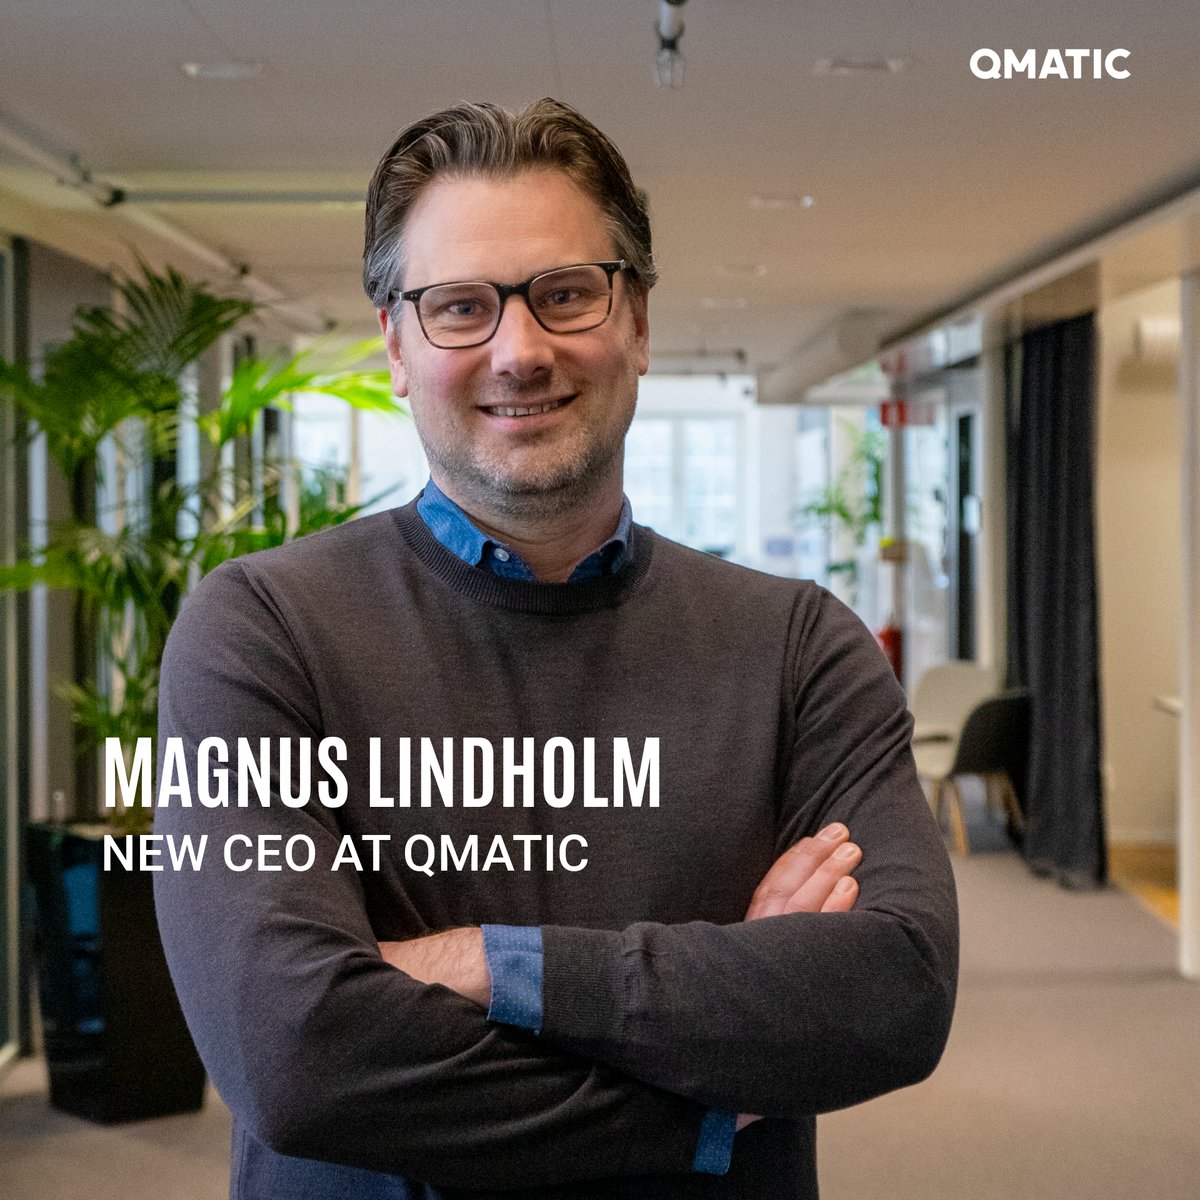 Exciting News at Qmatic! We are happy to announce Magnus Lindholm as our new CEO. Read the full announcement here: hubs.ly/Q02qft3j0